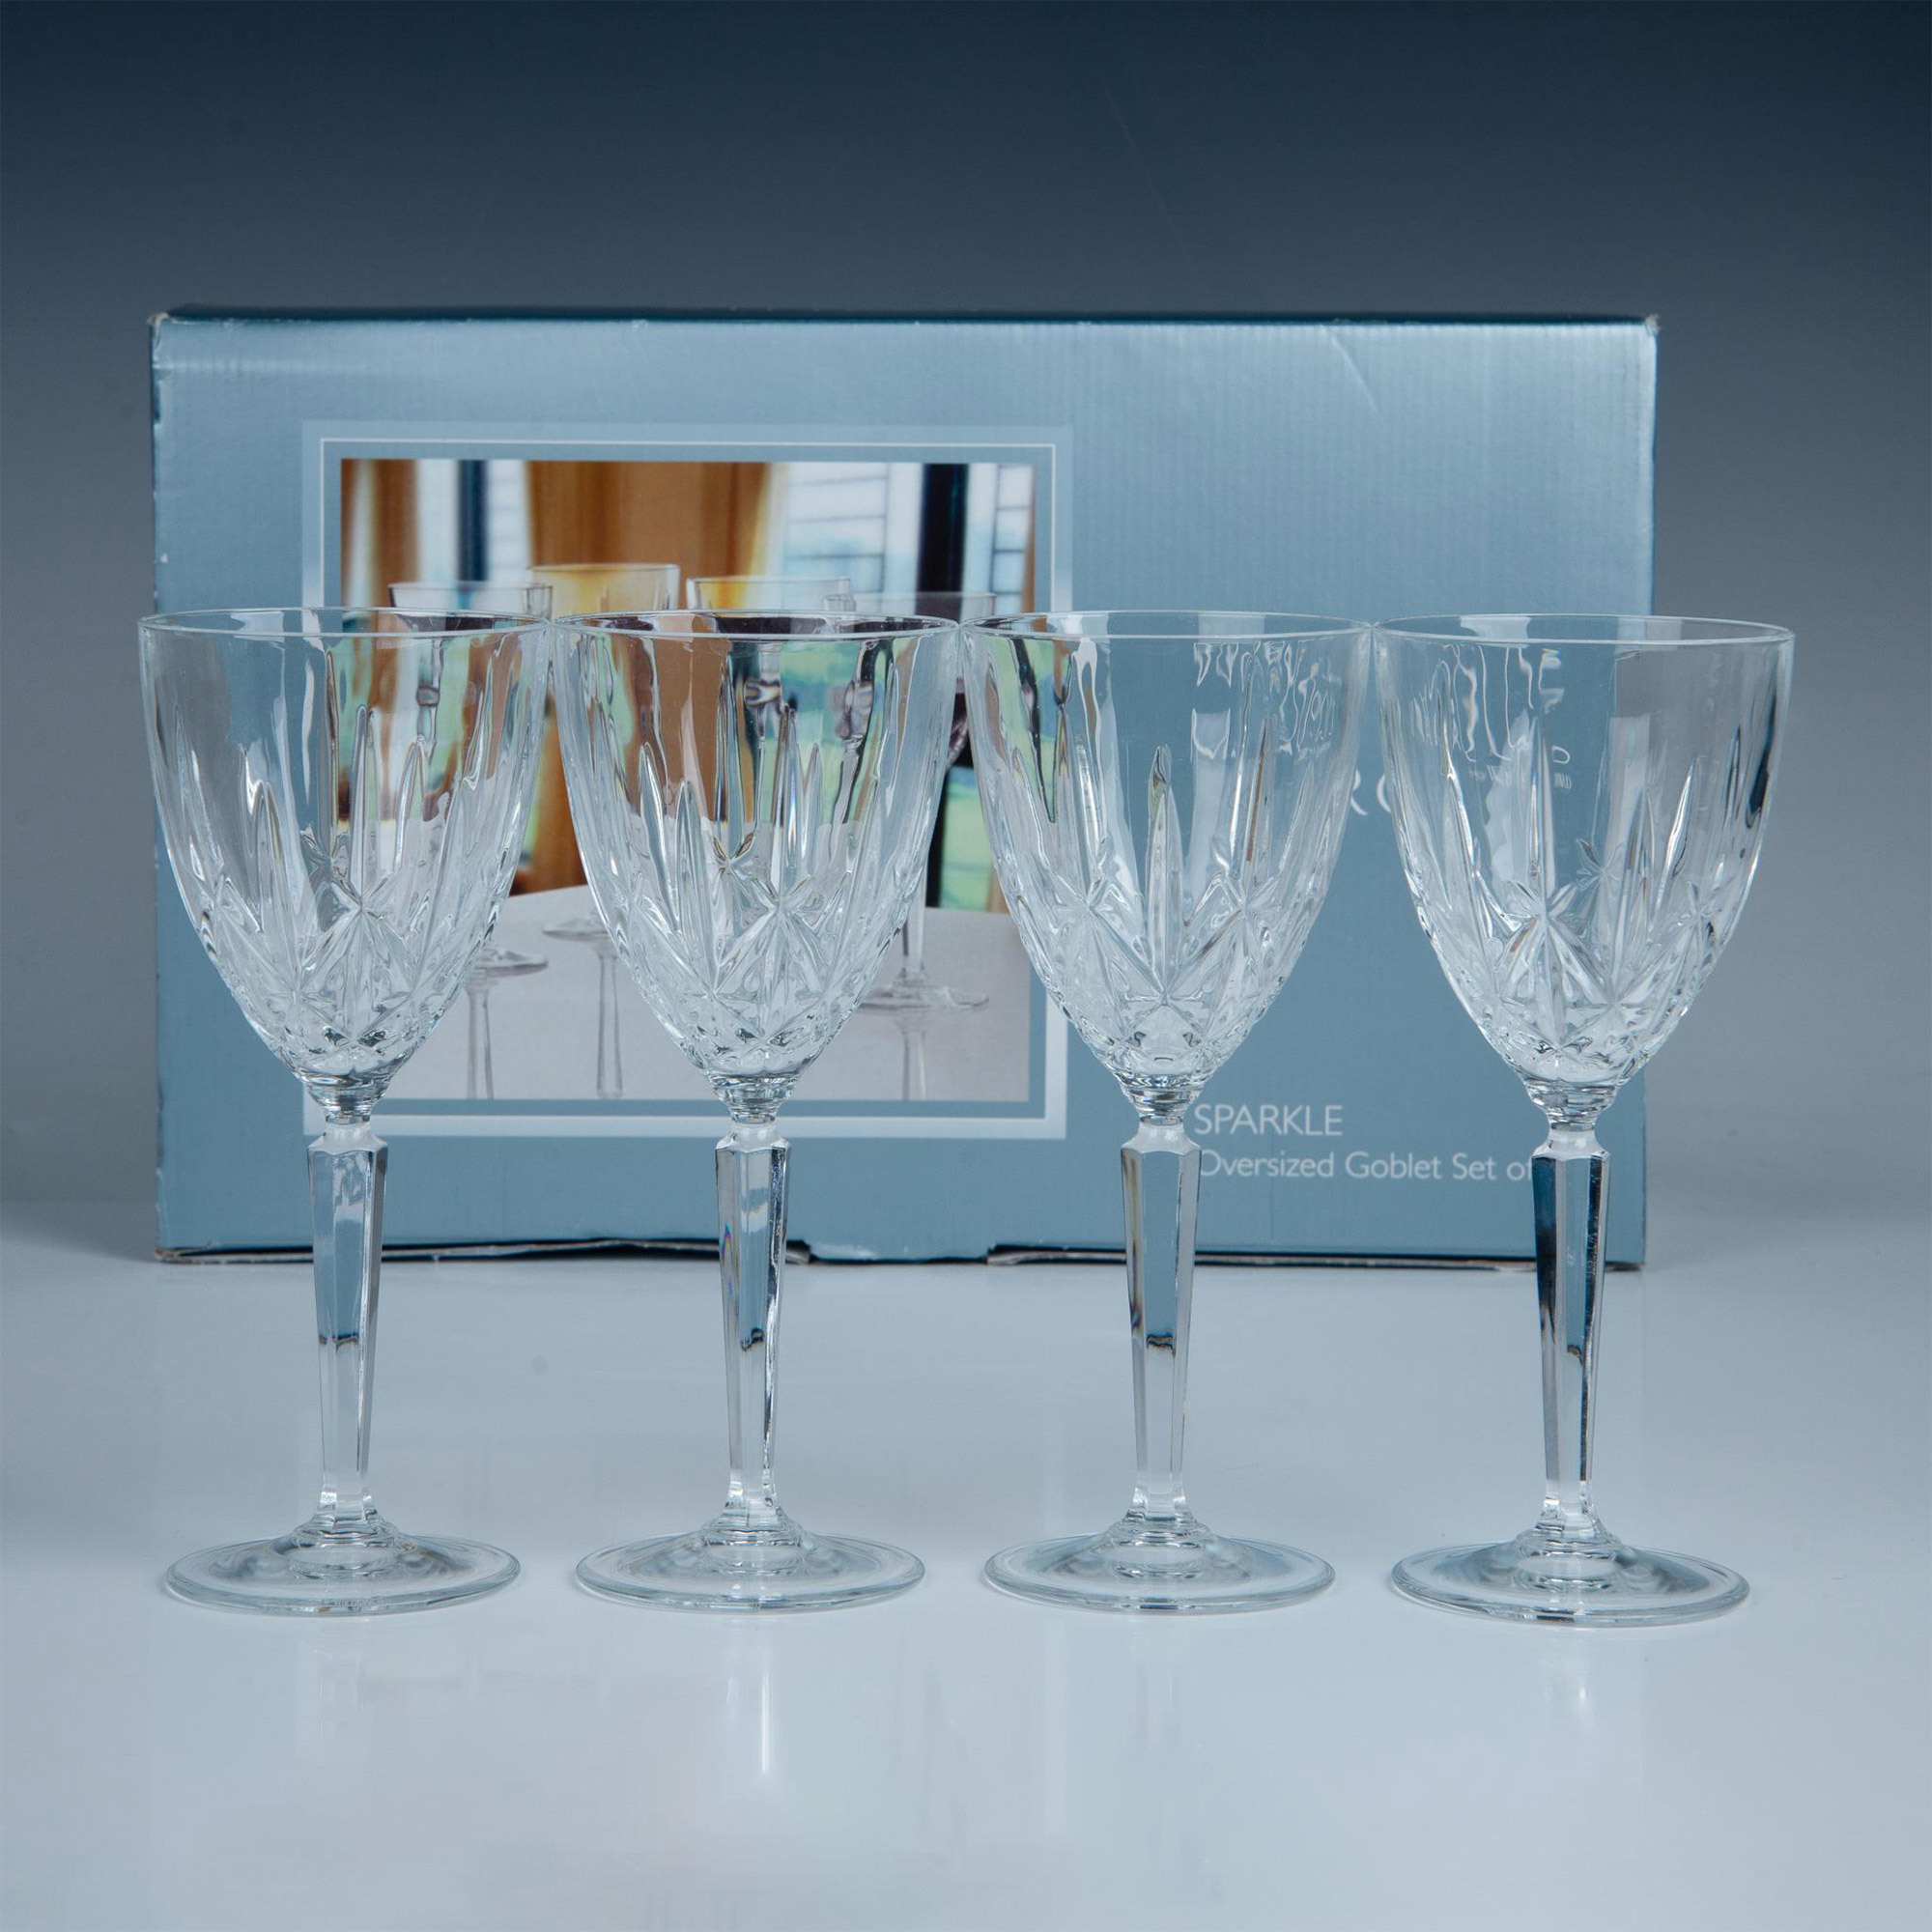 4pc Marquis by Waterford Set of Oversized Goblets, Sparkle - Image 5 of 7